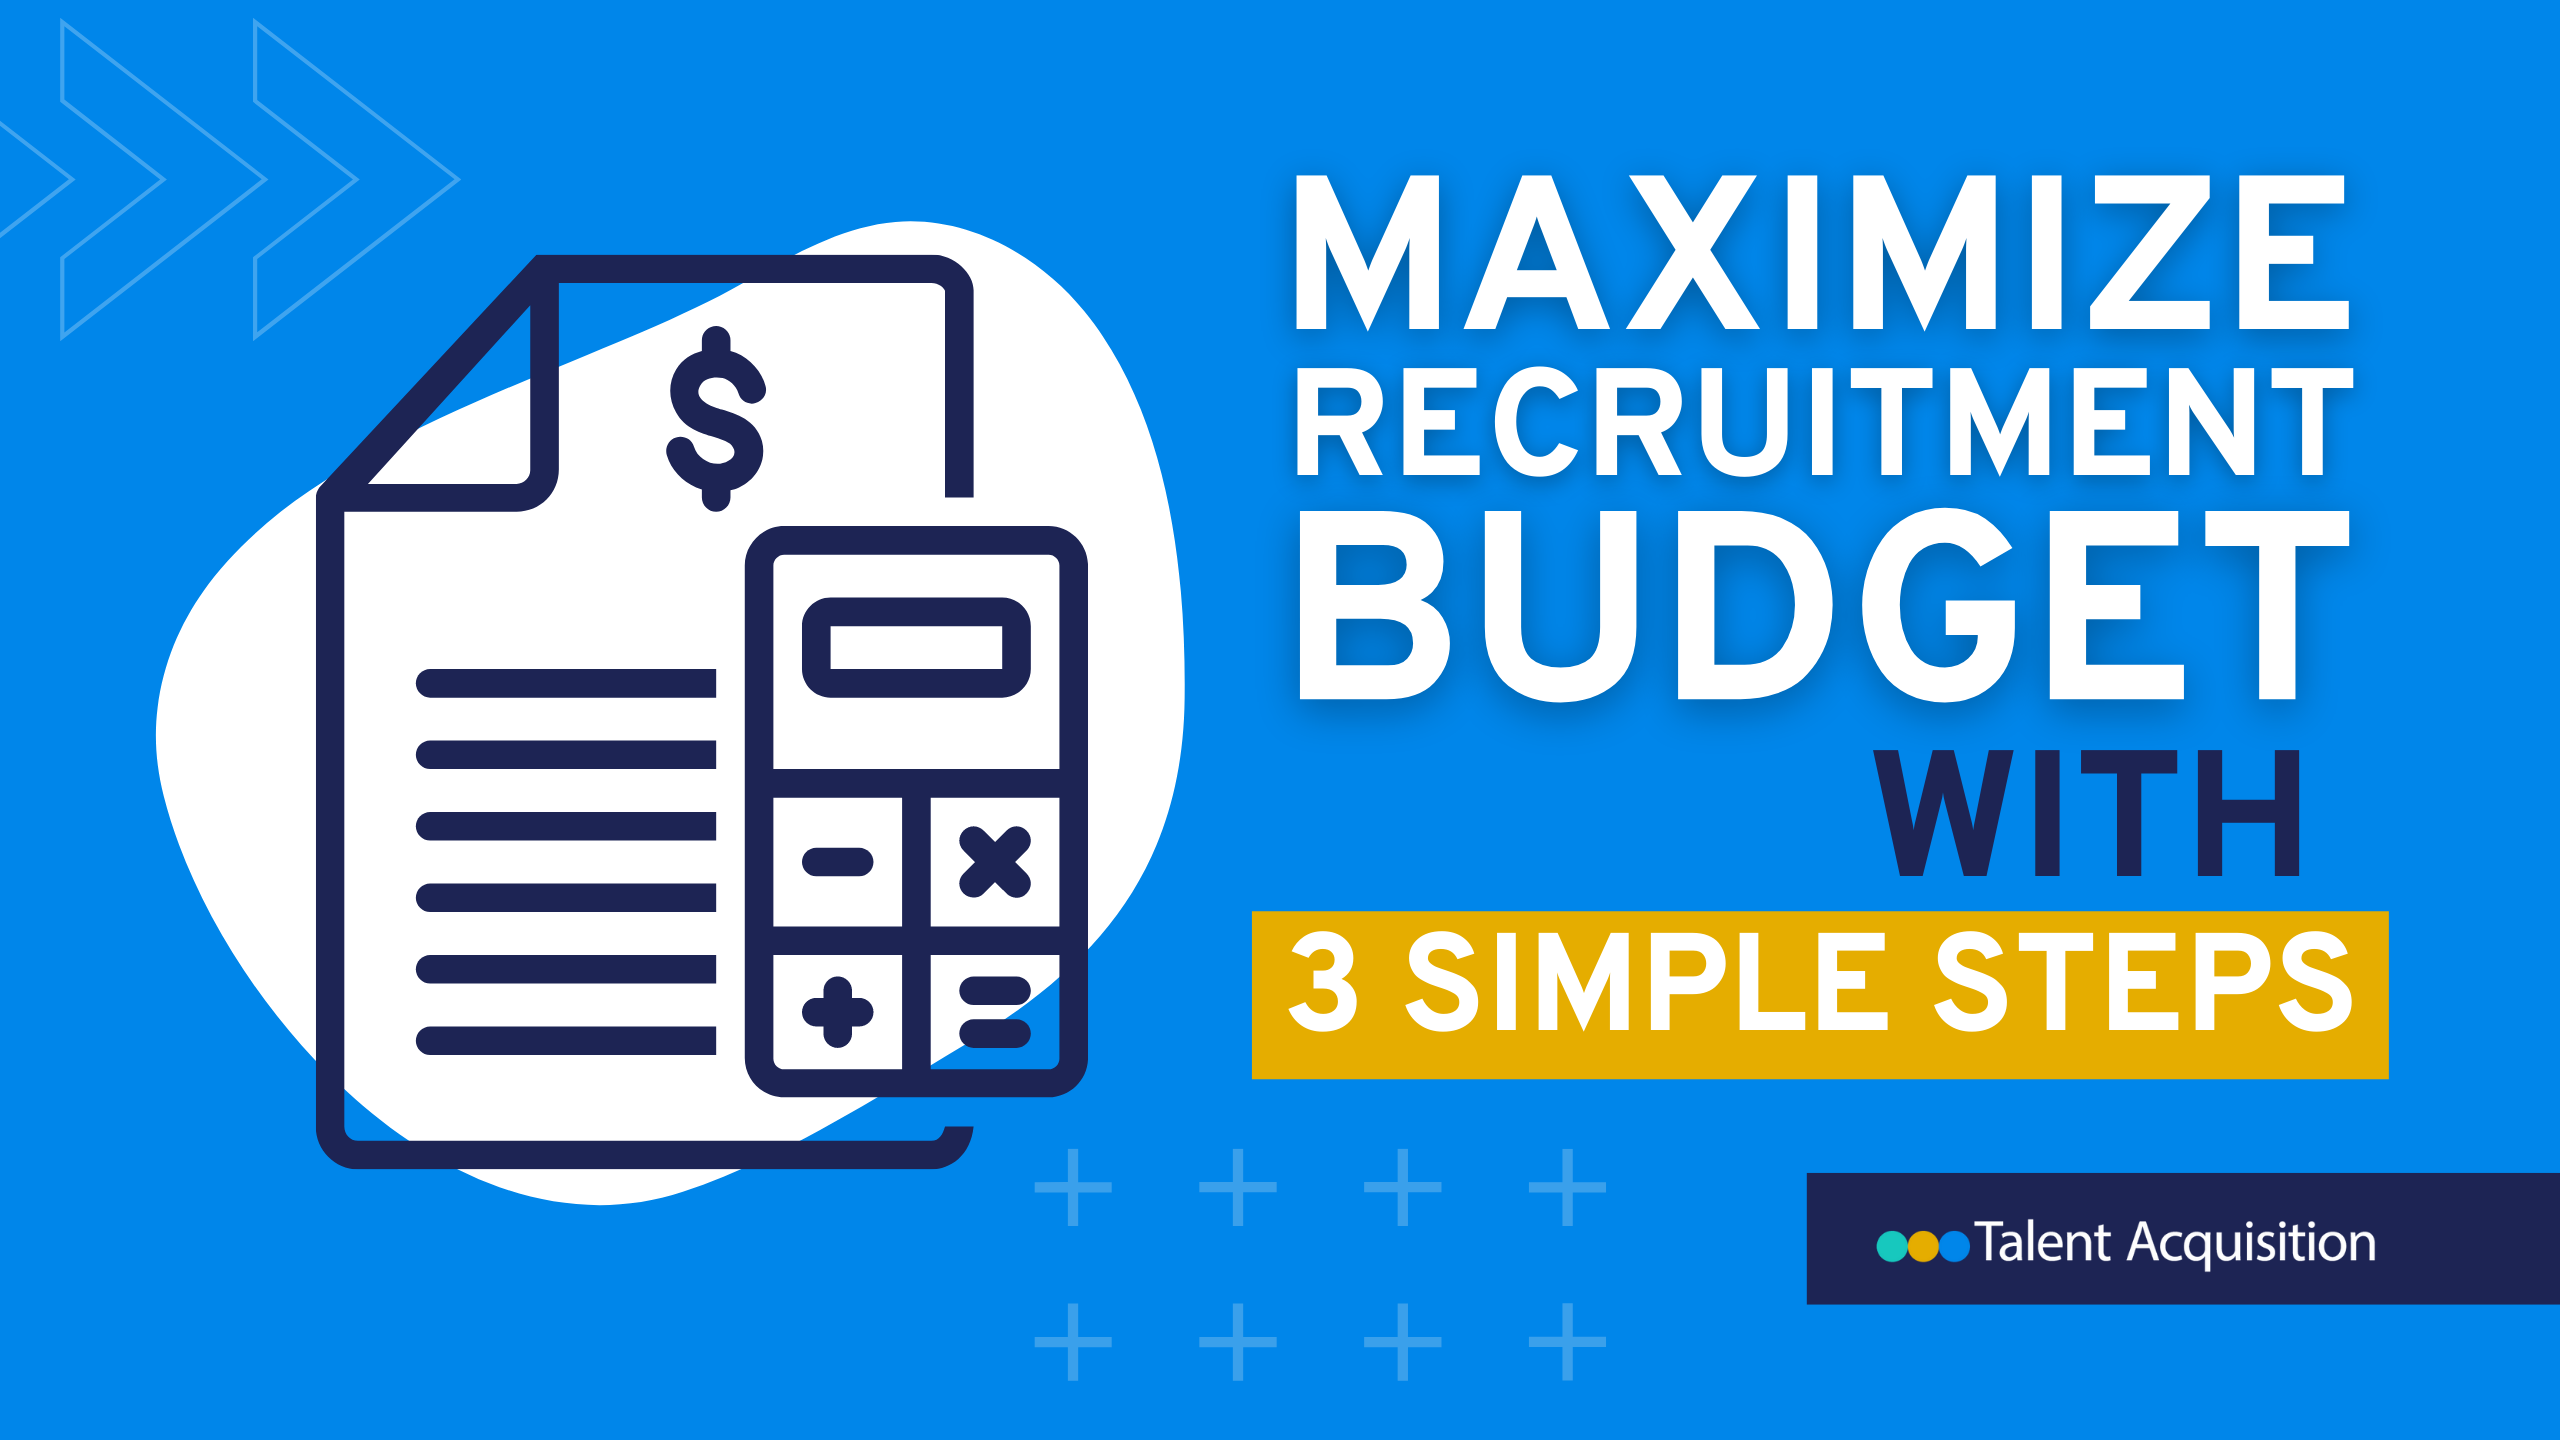 Maximize Your Recruitment Budget with These 3 Simple Steps